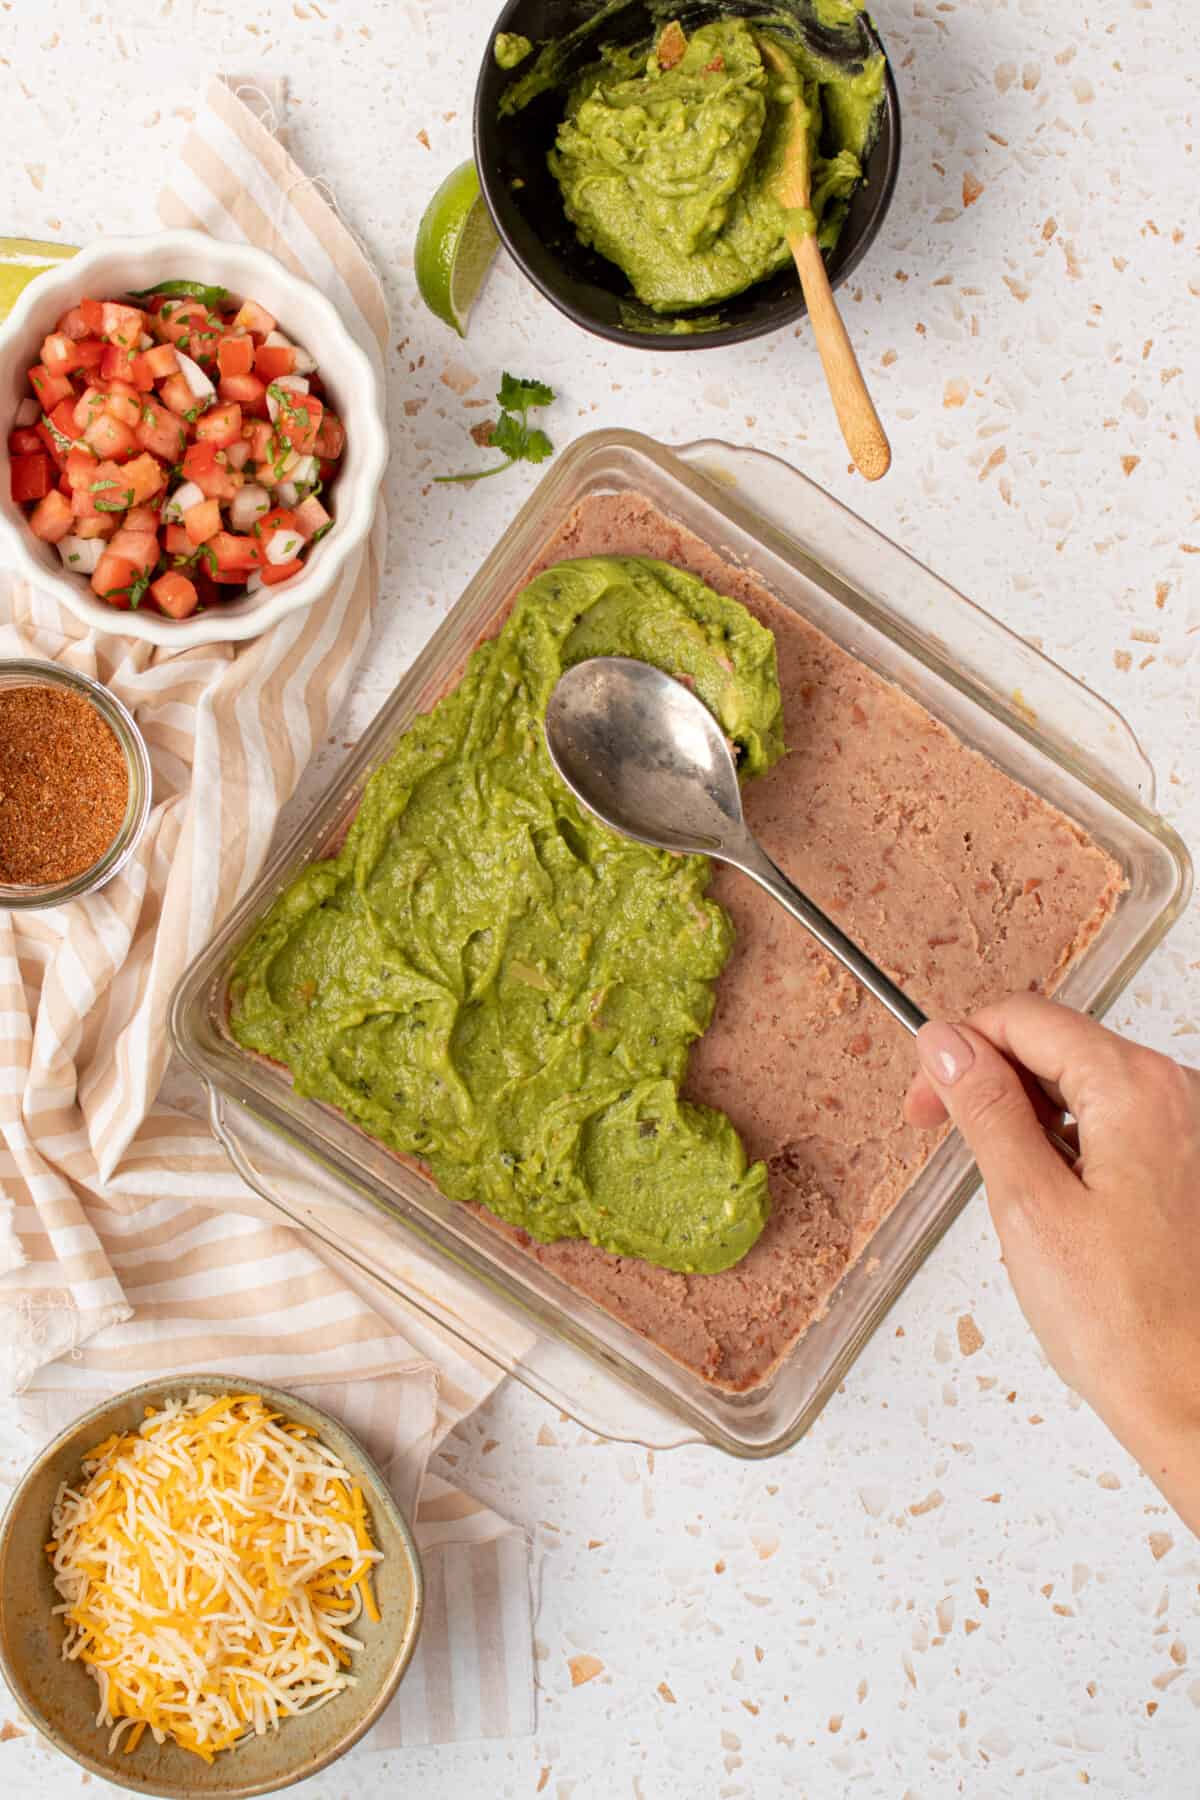 Spoon topping refried beans with guacamole.